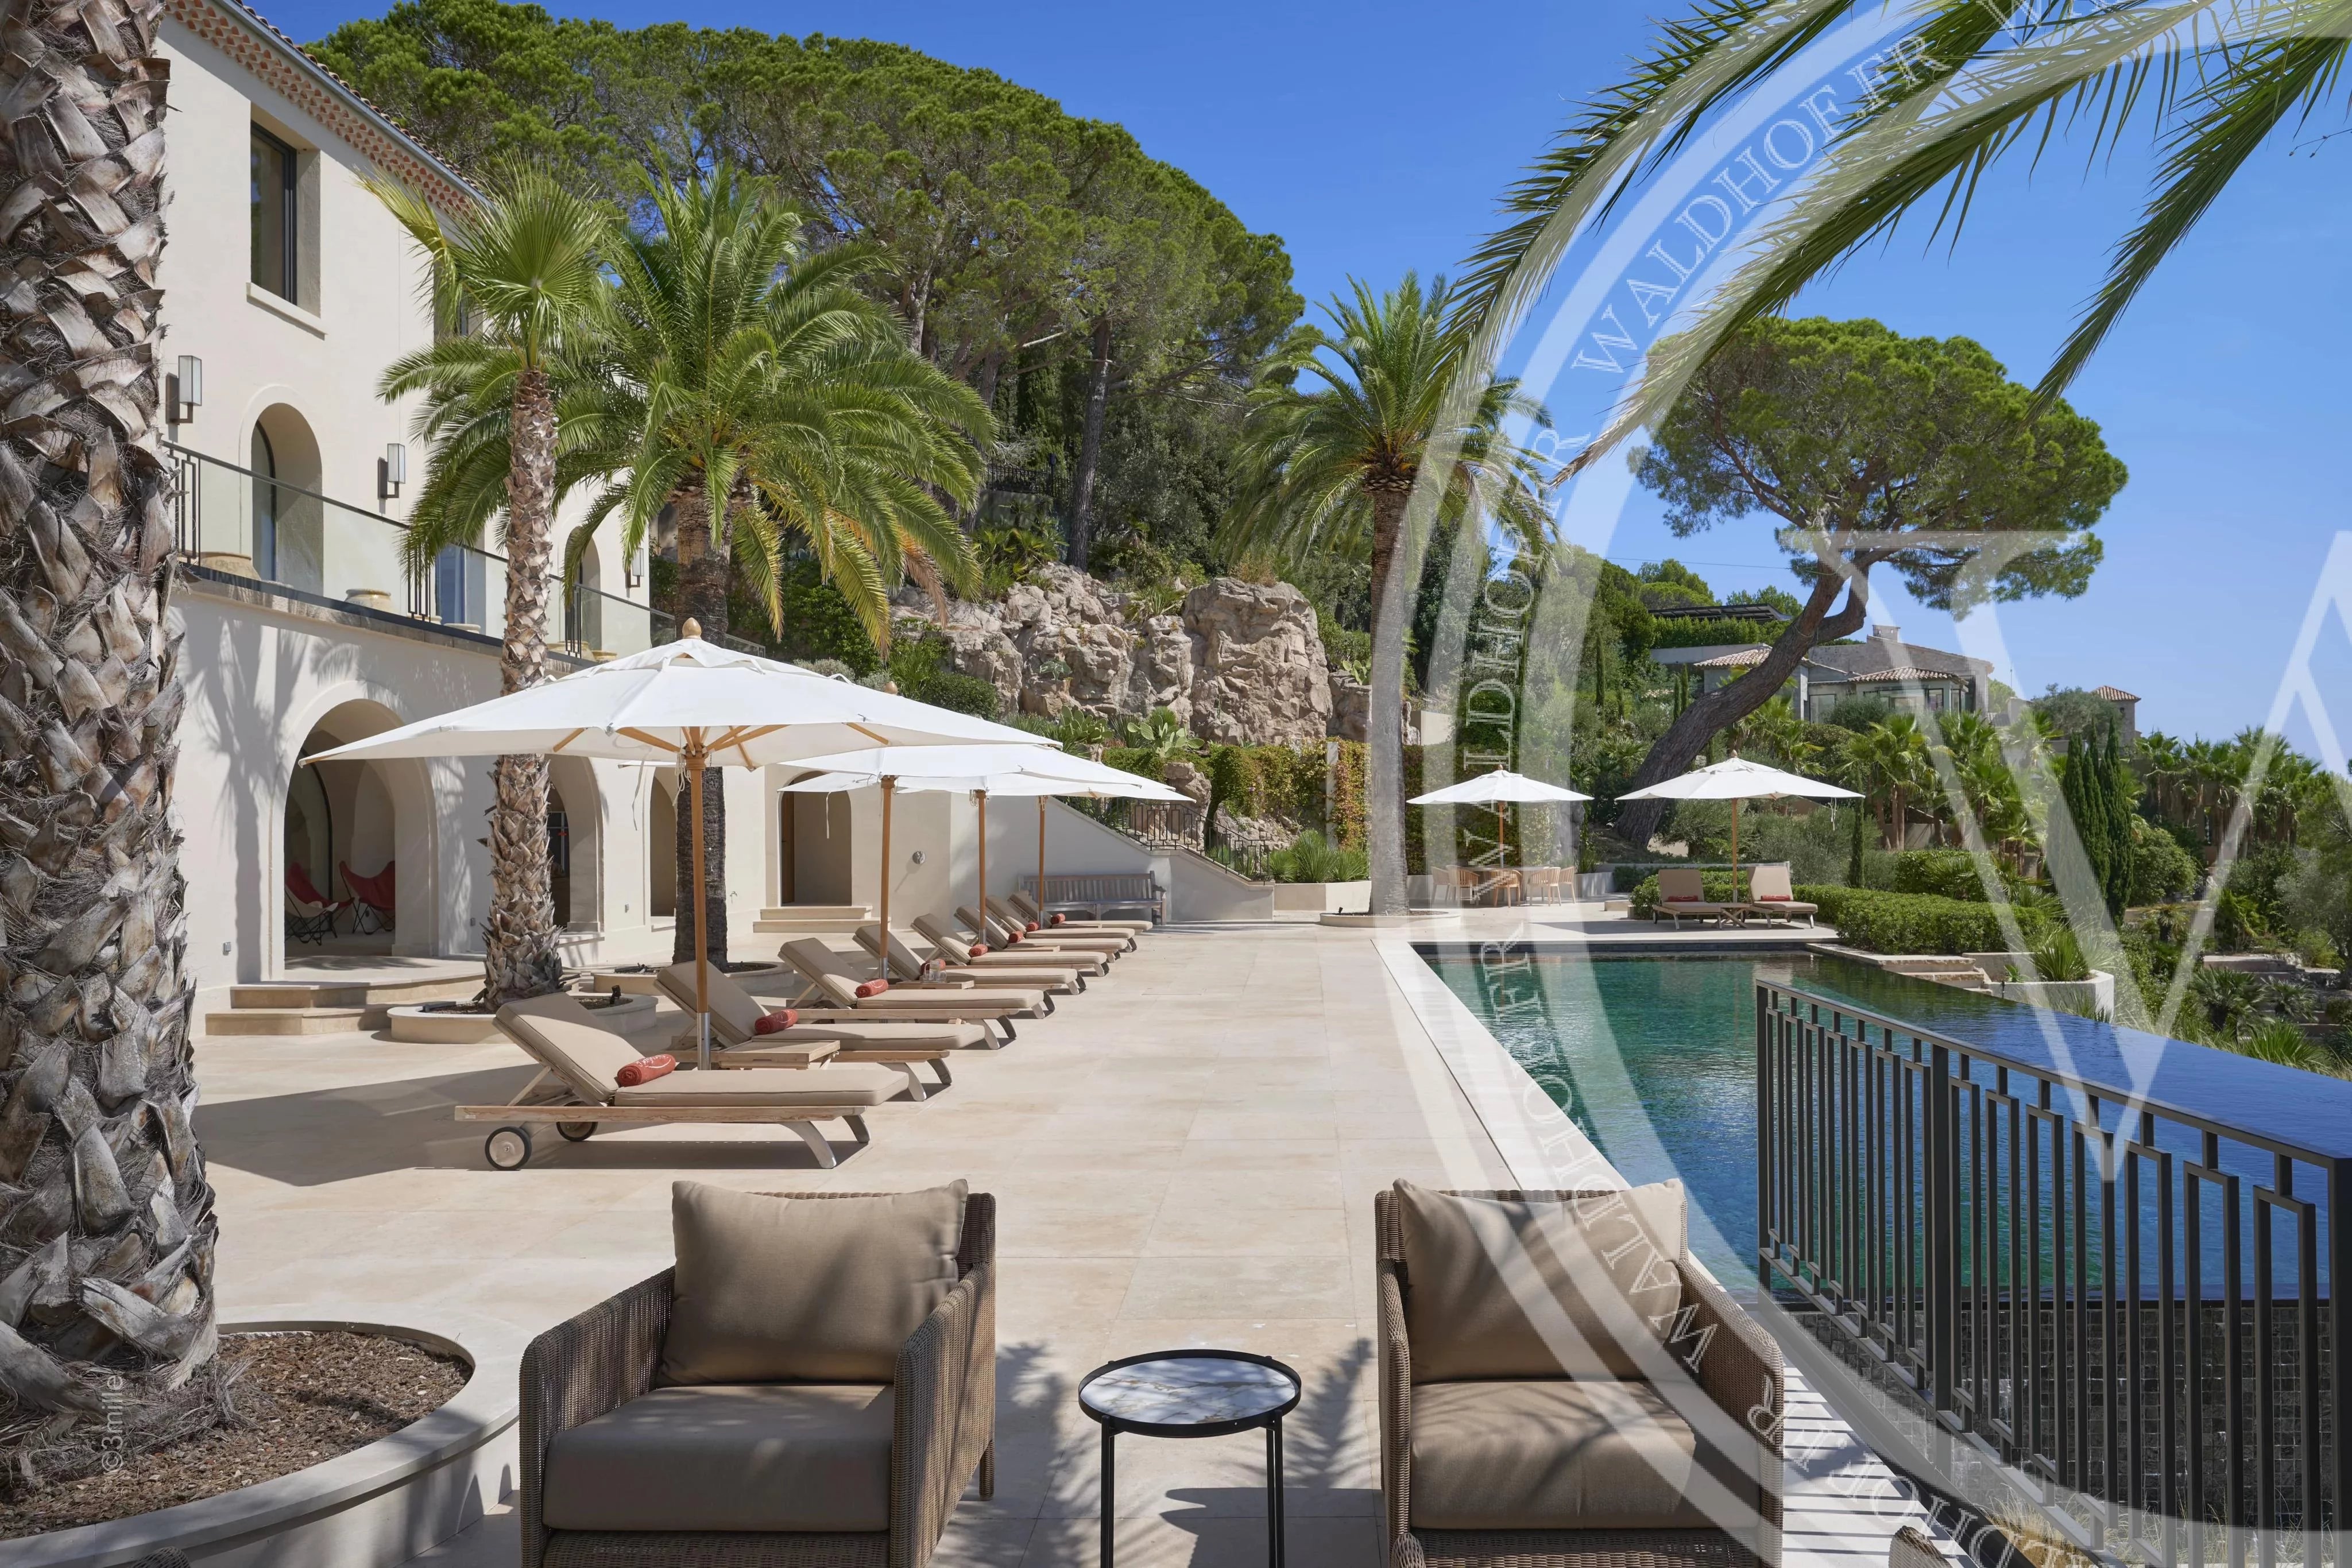 Fully renovated 3,000 m2 Palace overlooking all of Cannes